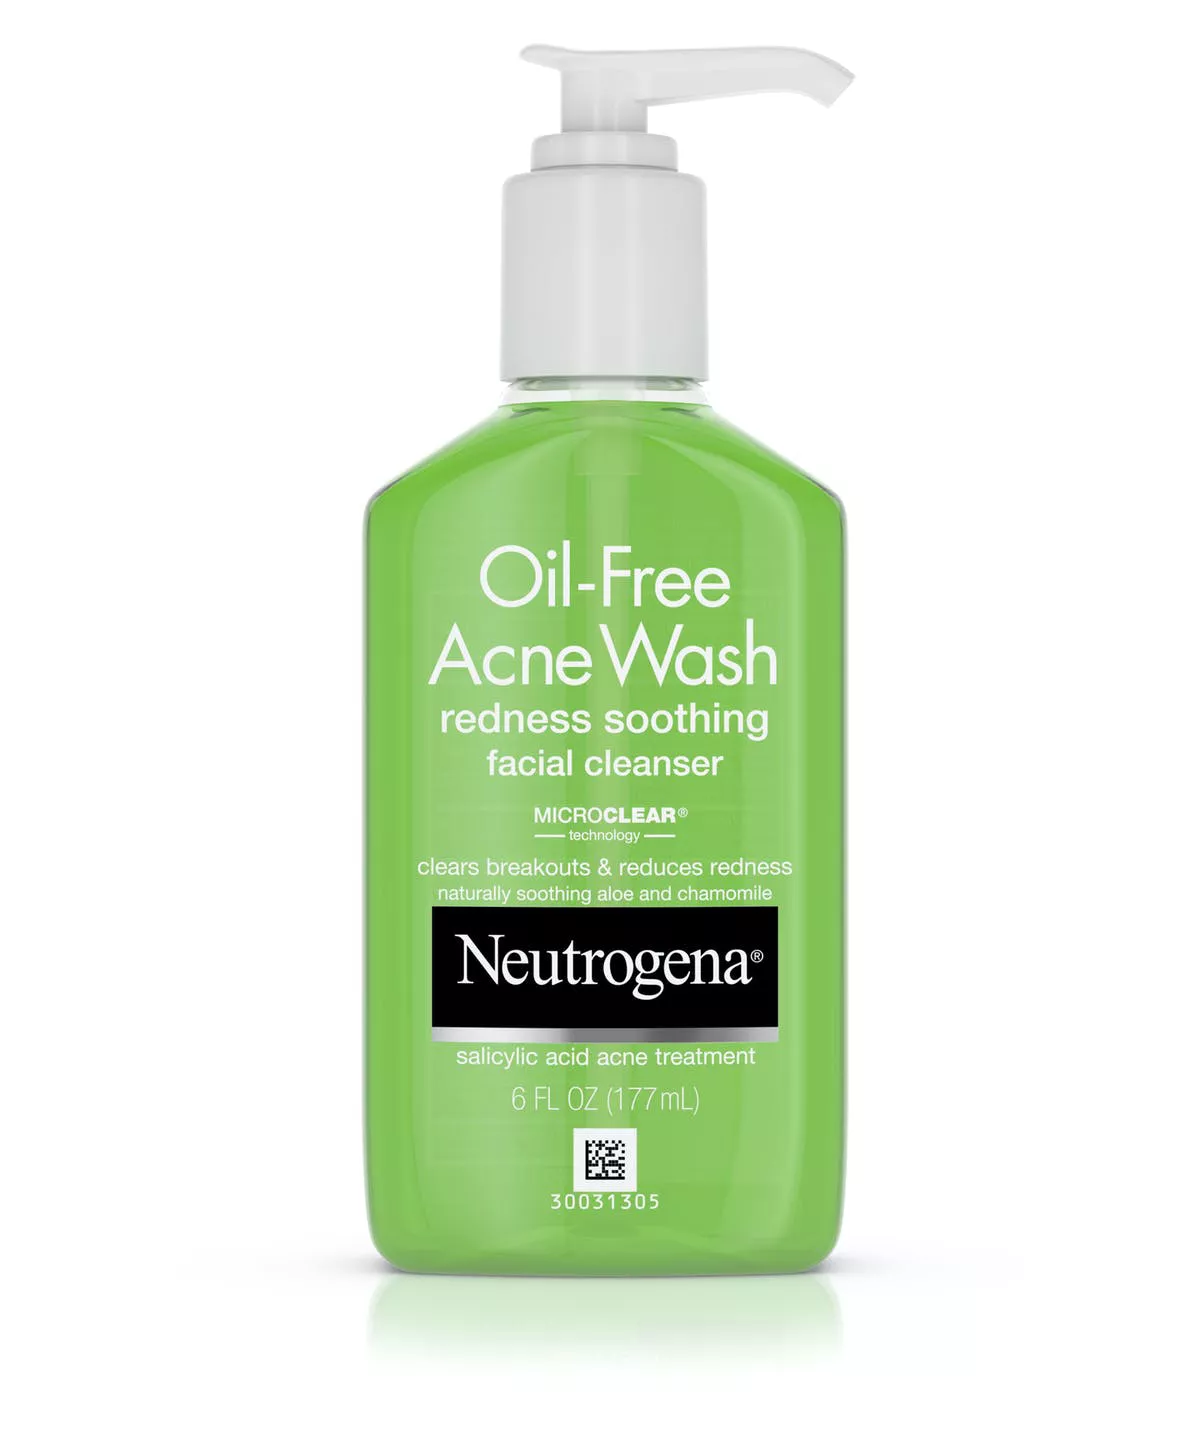 Neutrogena Oil-Free Acne Wash Redness Soothing Cleanser